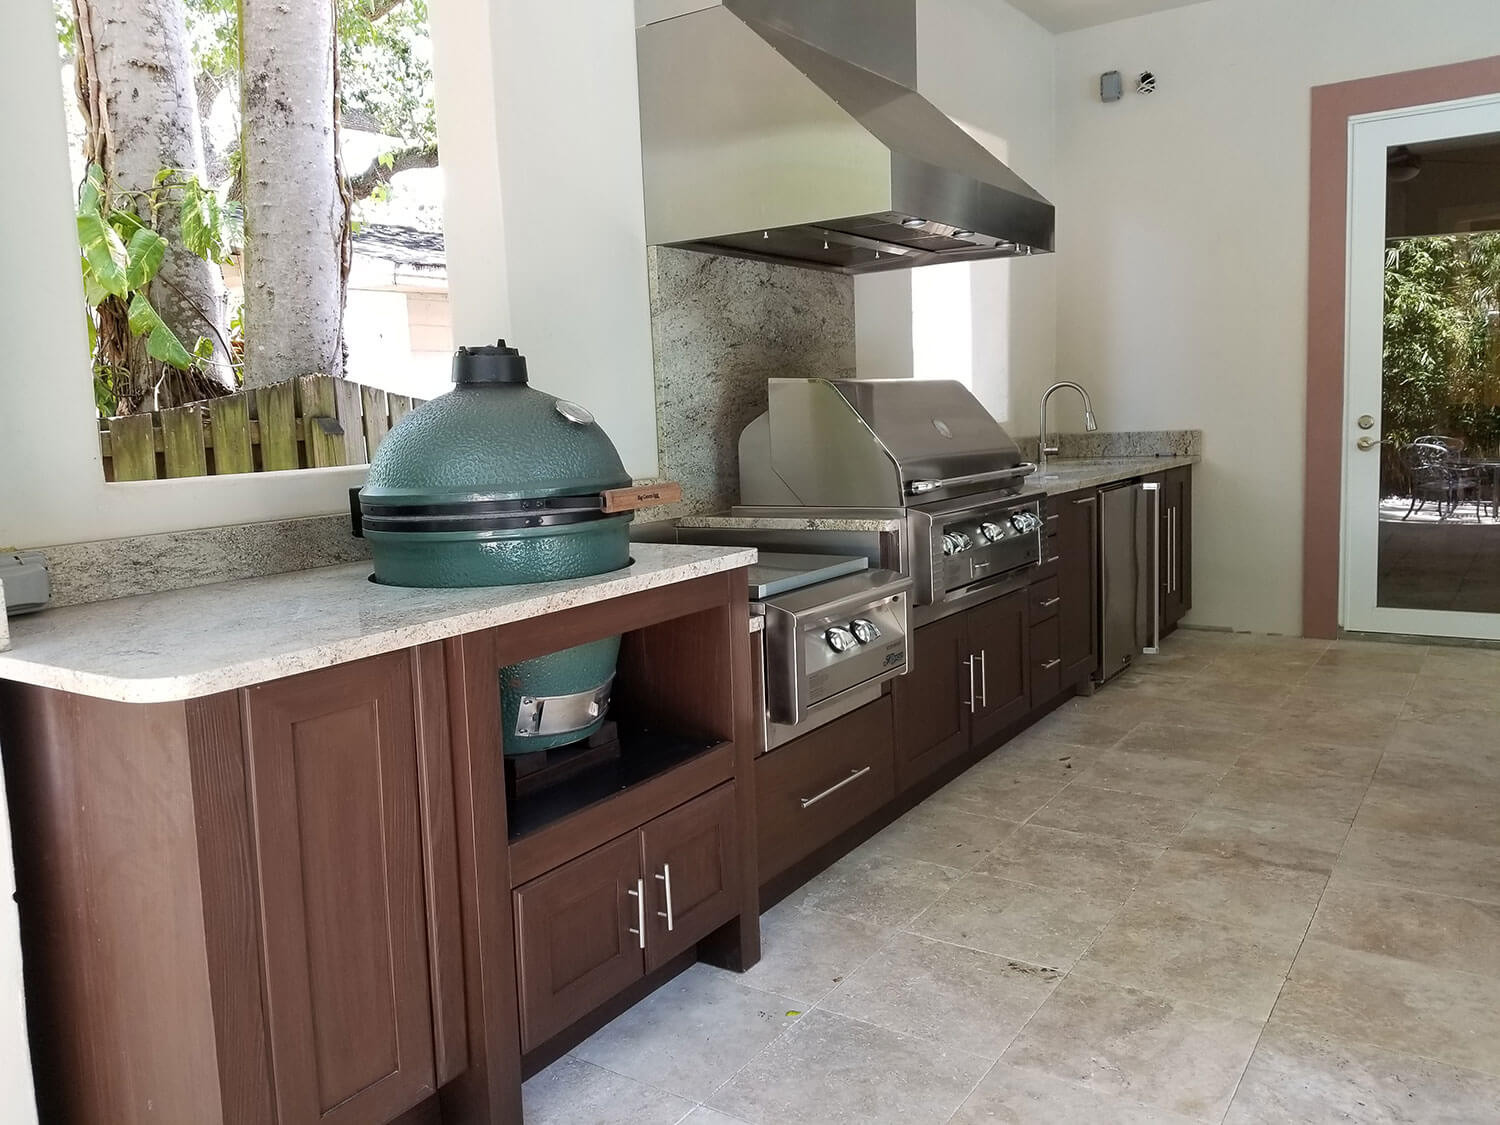 Outdoor Kitchen Tampa
 Extended Linear Outdoor Kitchen In South Tampa